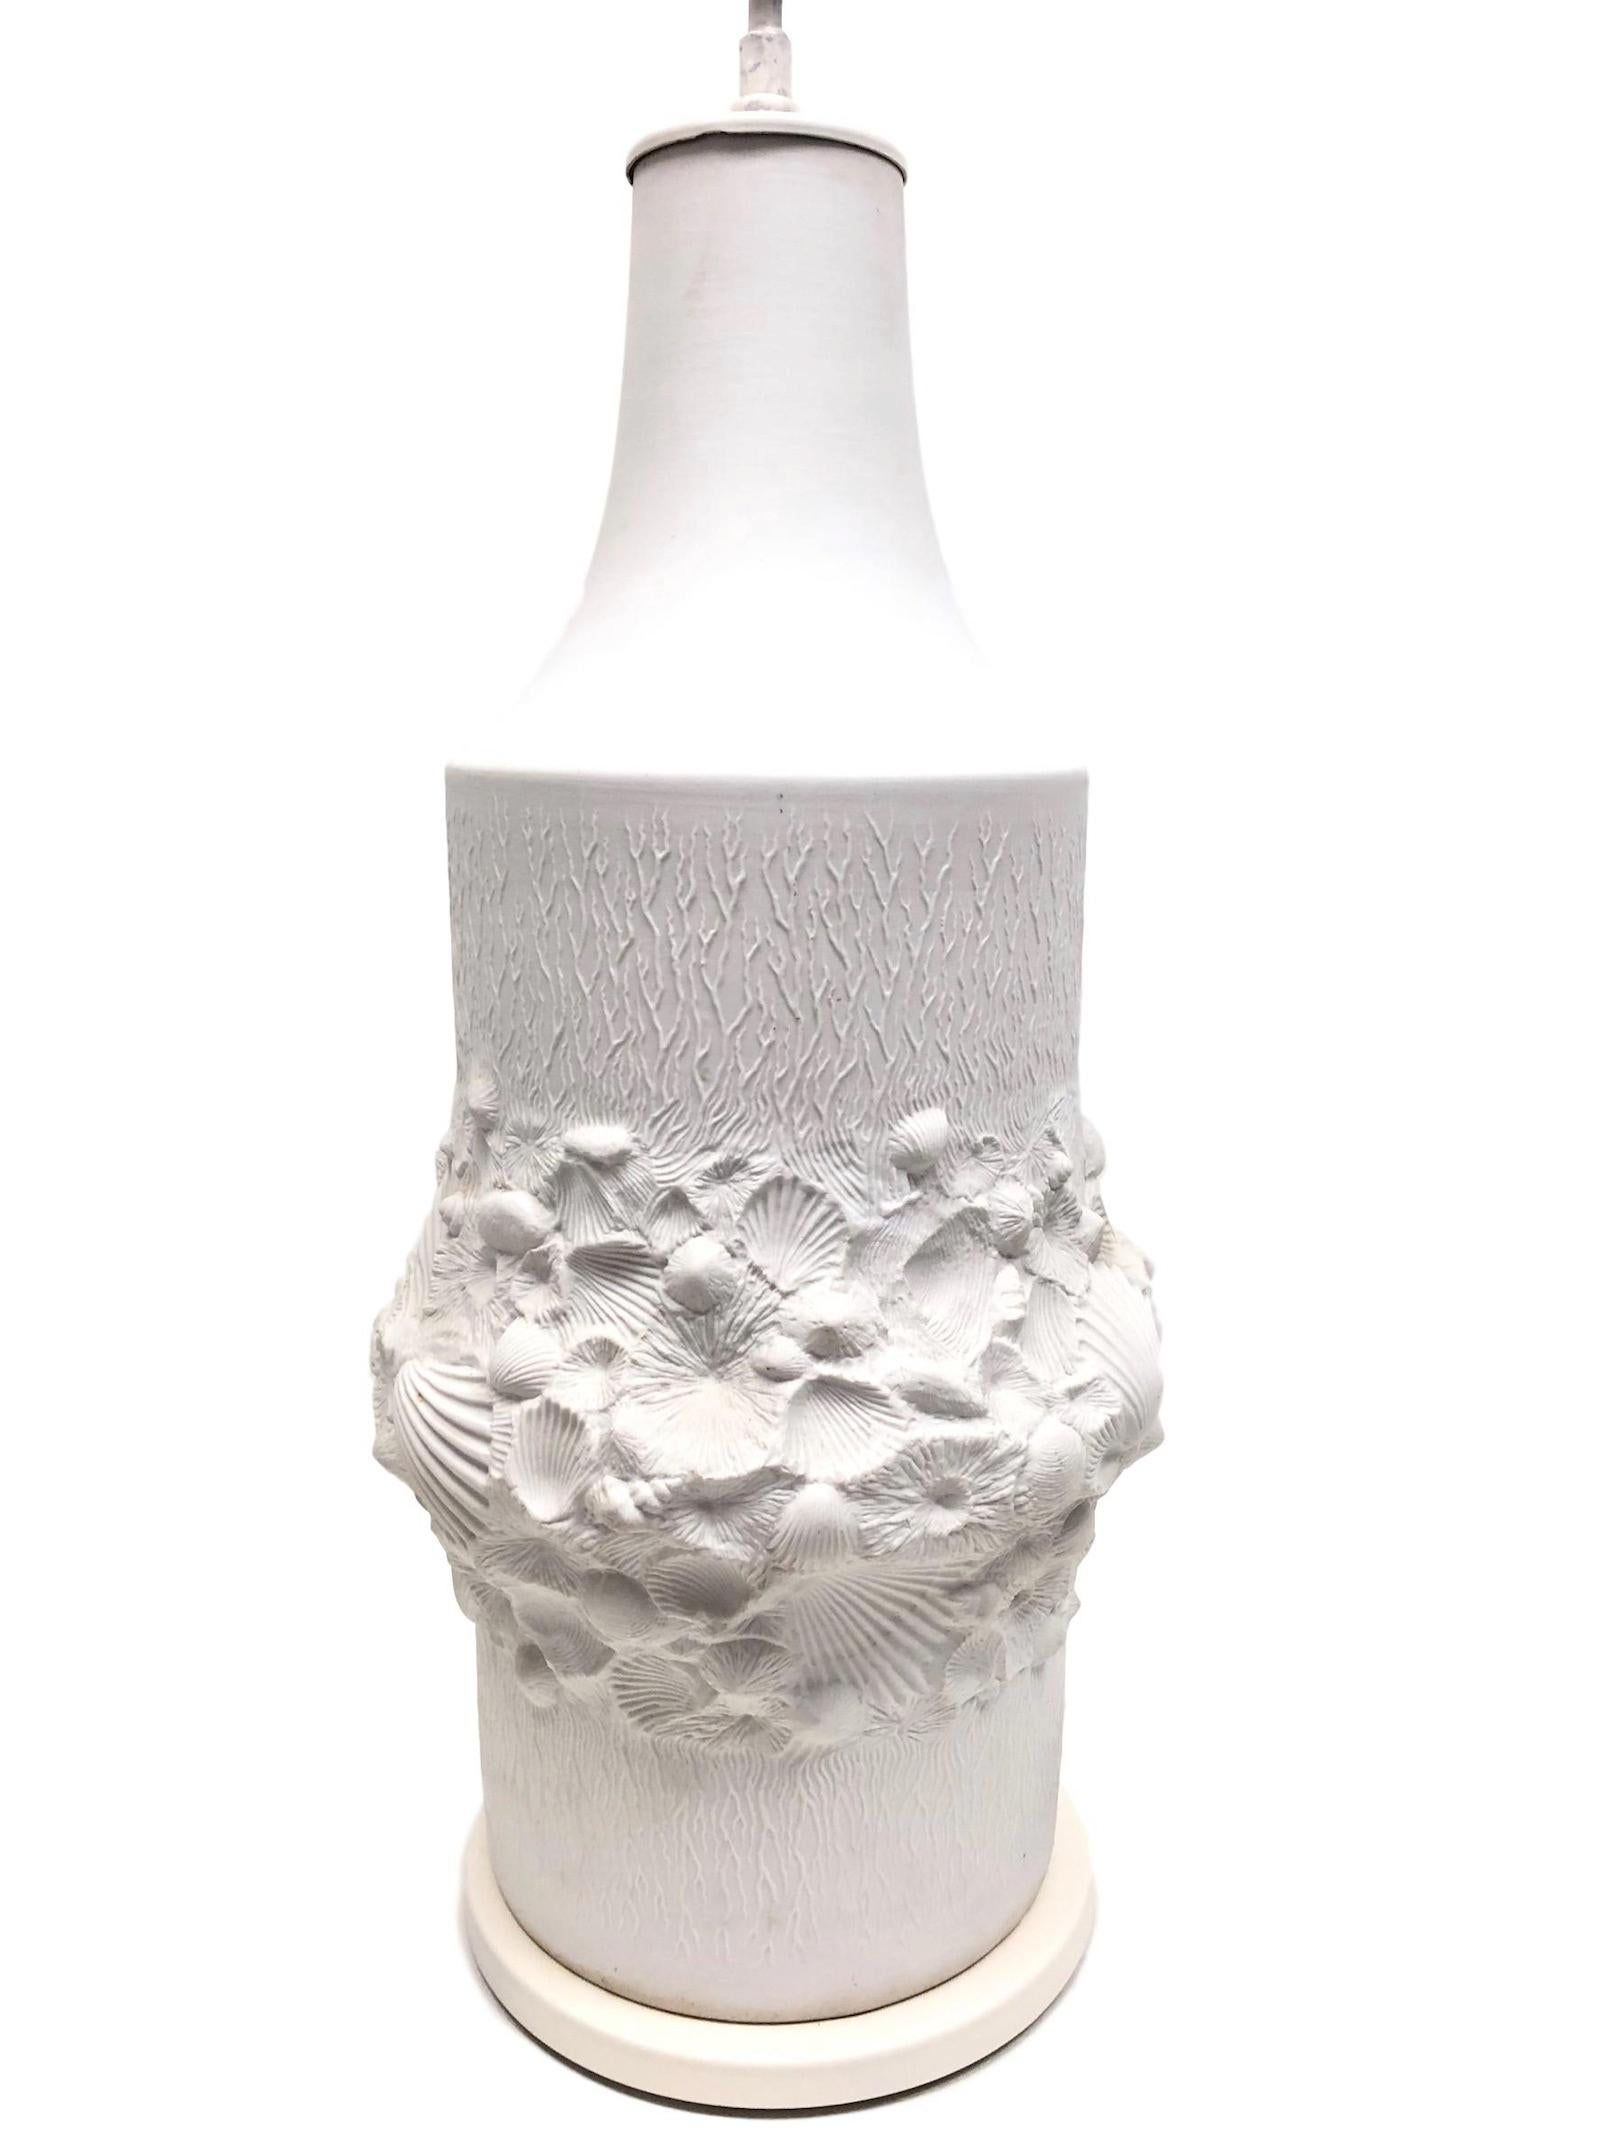 Mid-20th Century Monumental Fossil Shell Table Lamp Foot Bisque Porcelain, 1960s Kaiser Porcelain